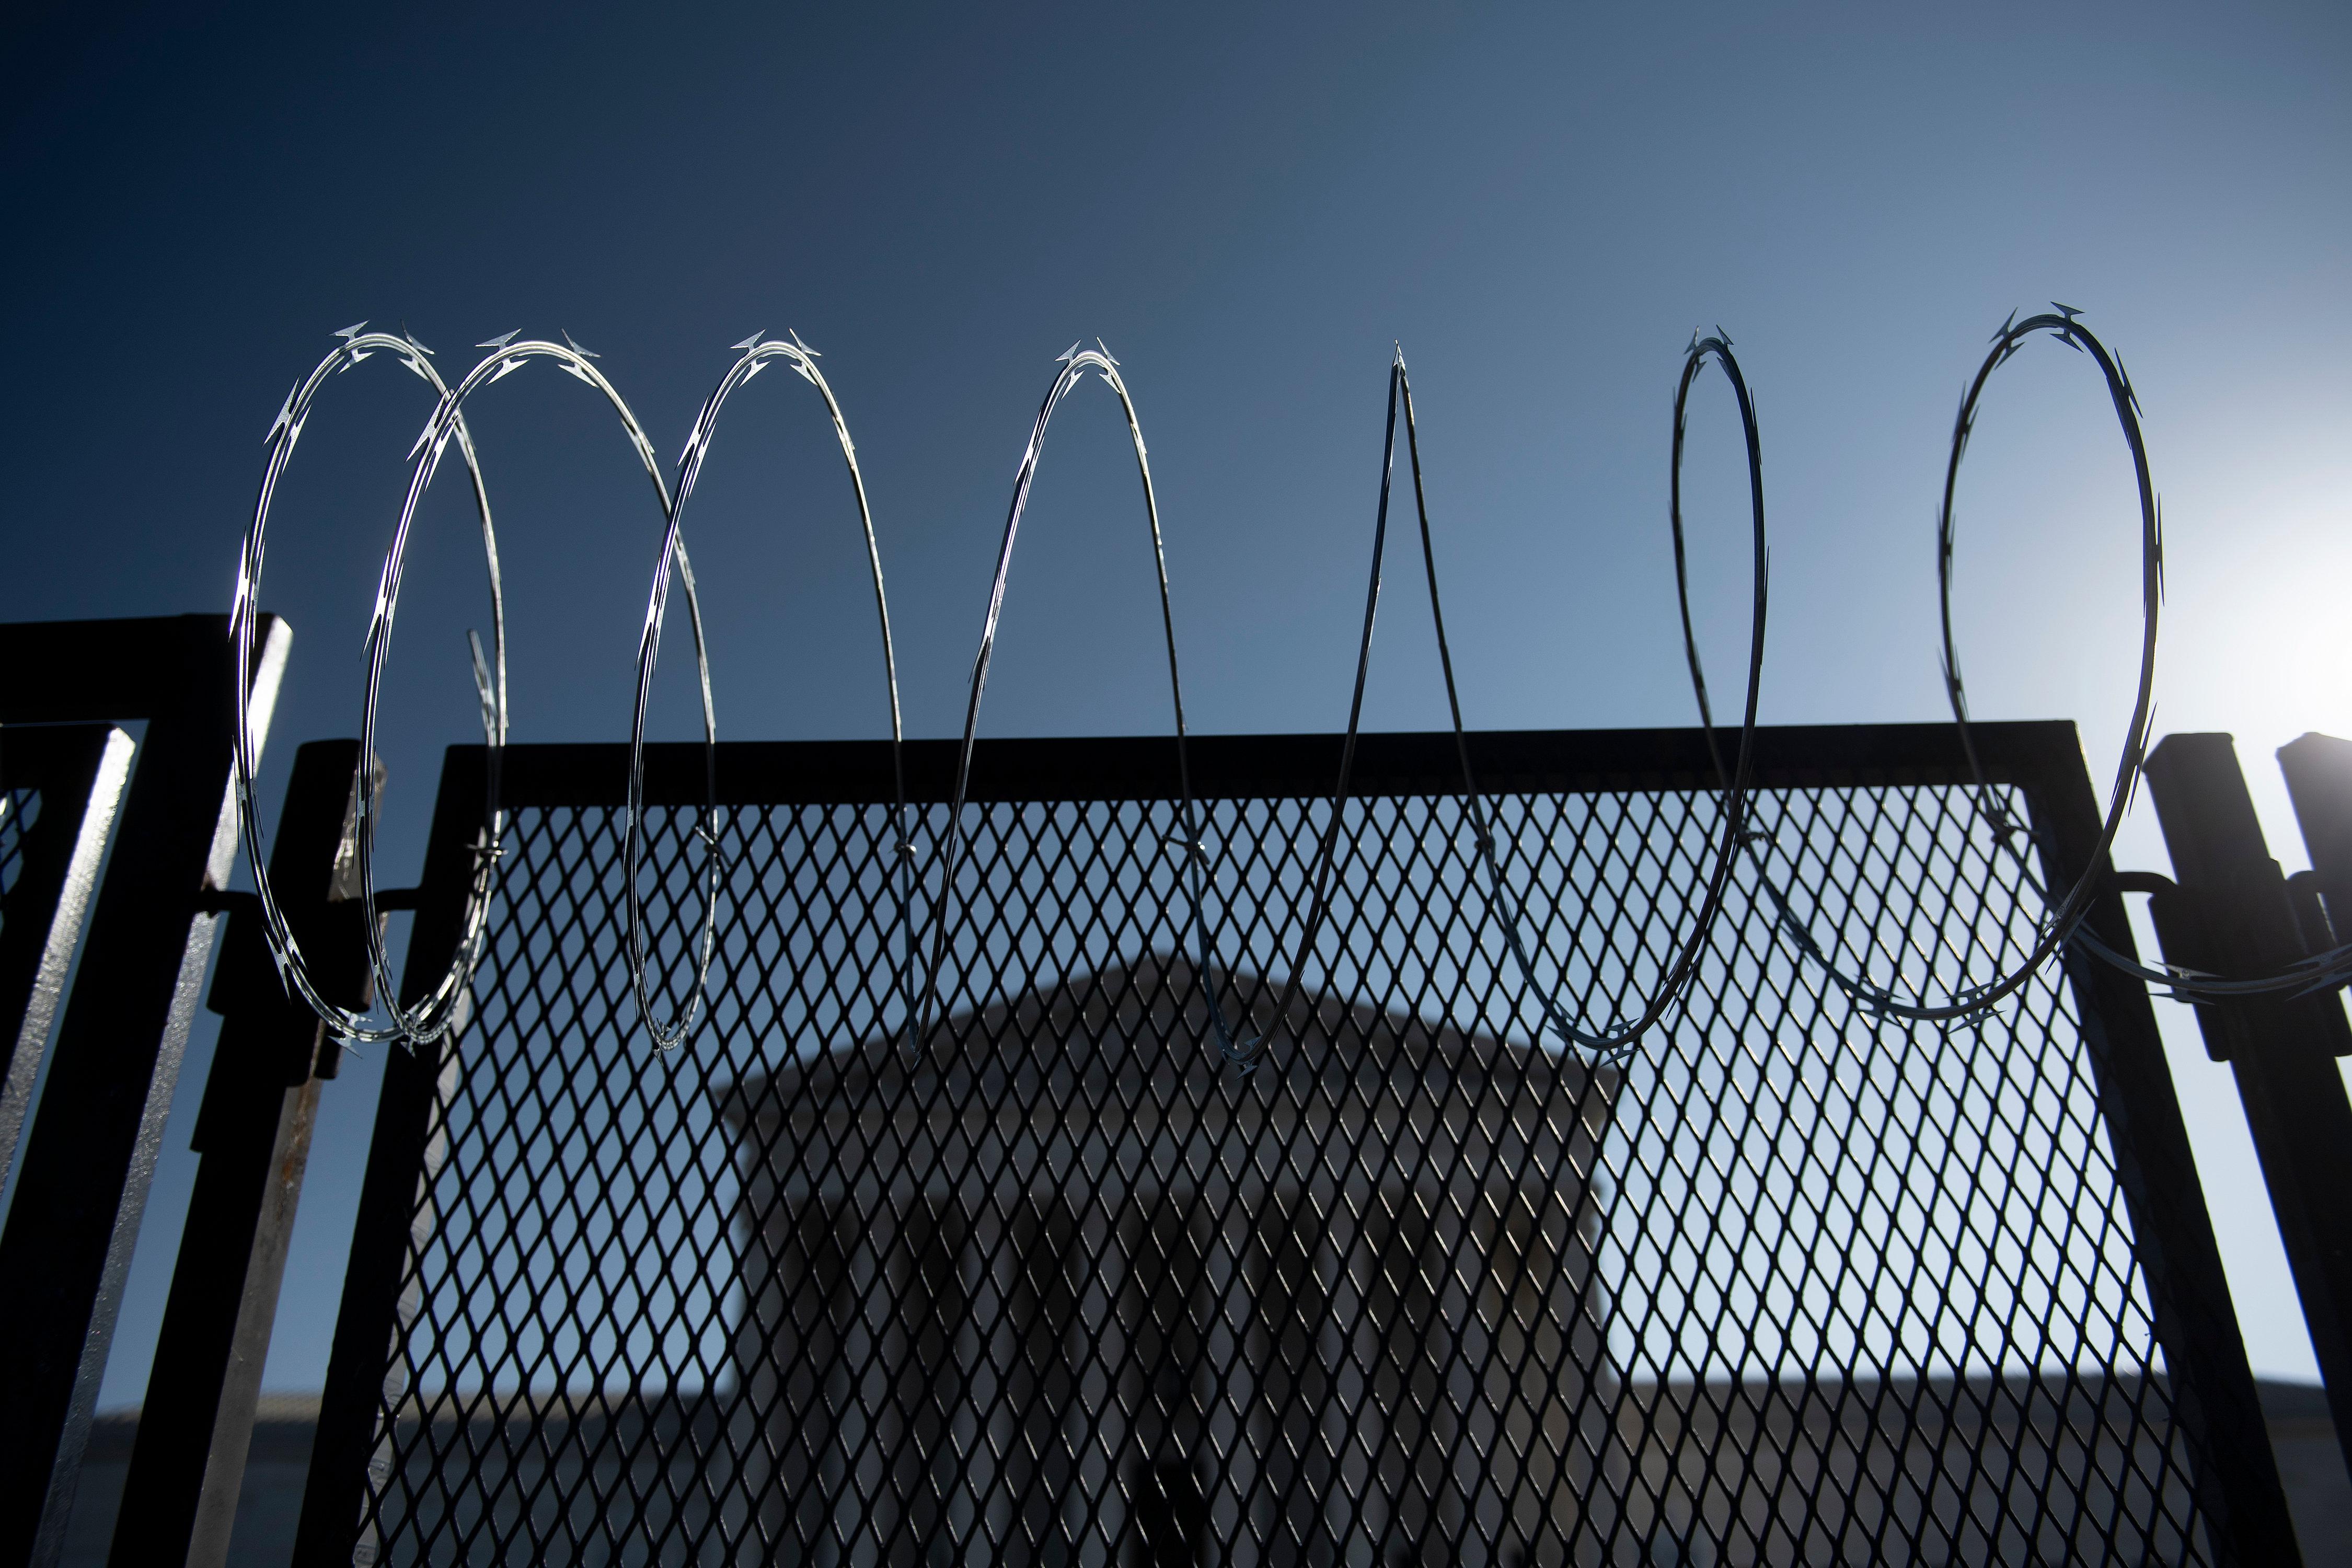 The Supreme Court surrounded by a fence and barbed wire.